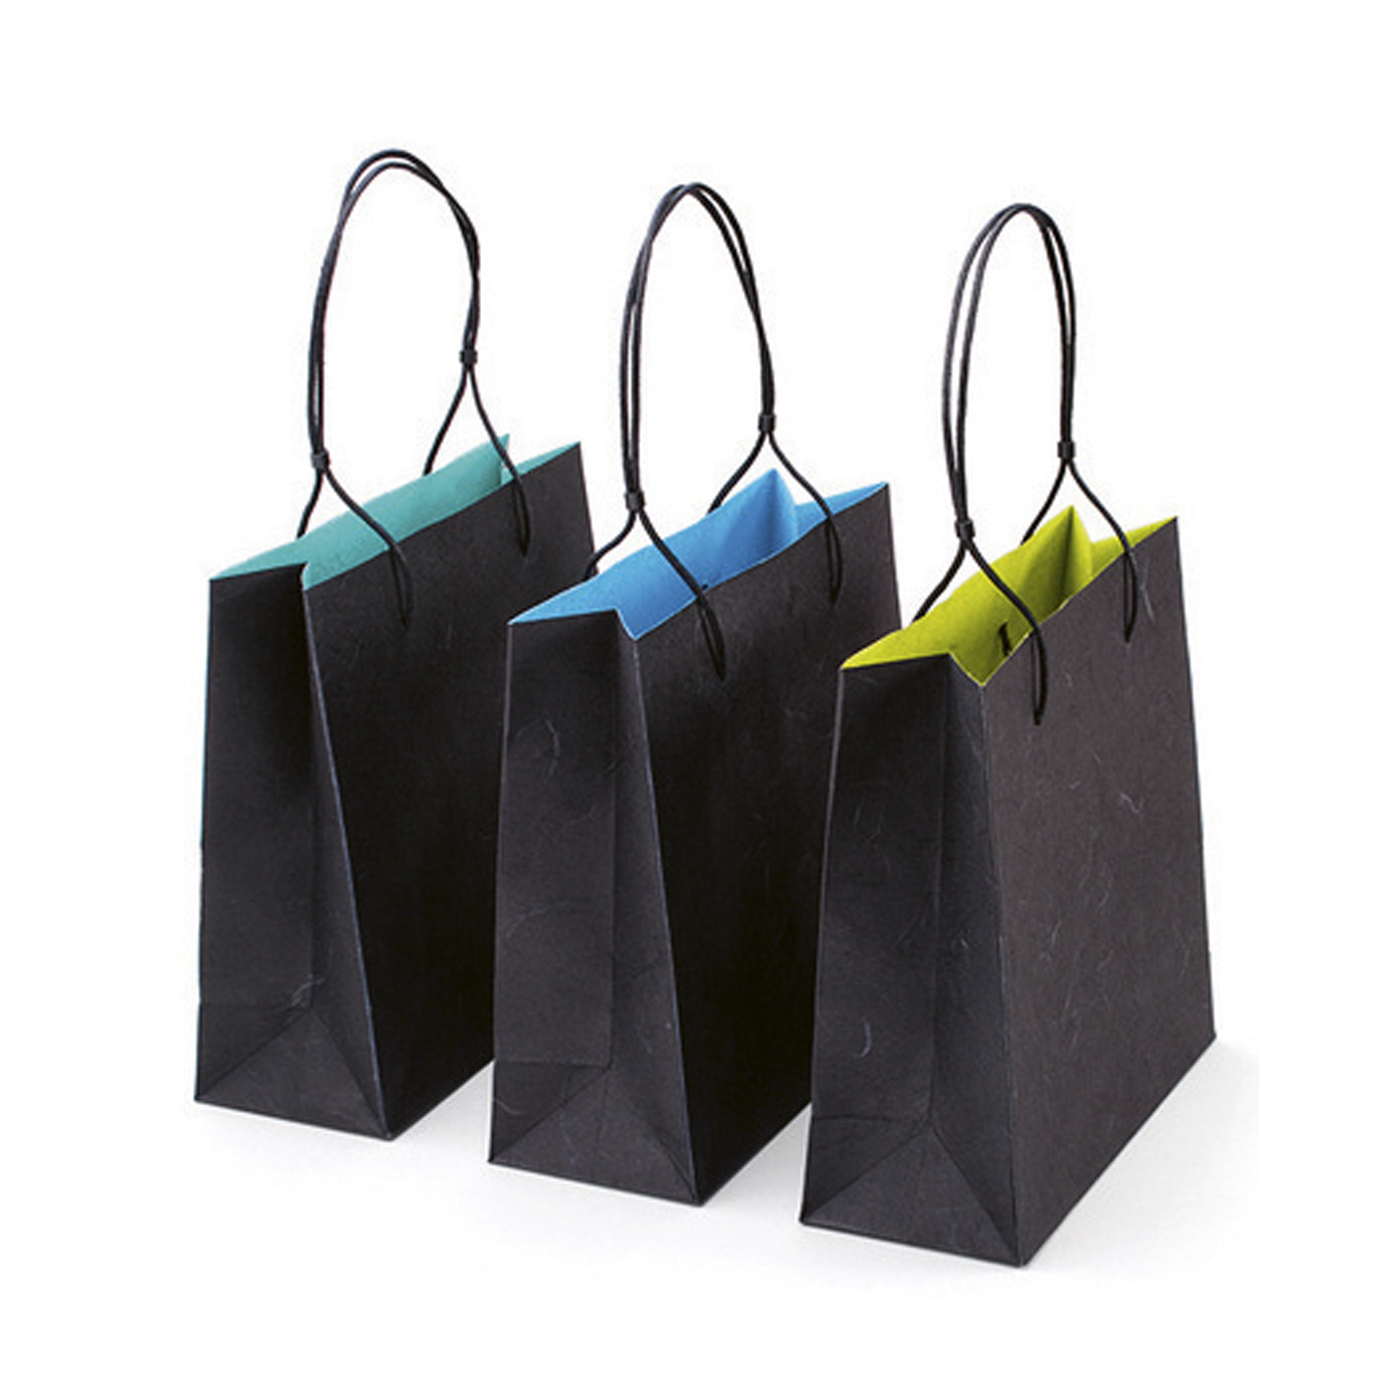 Carrying Bags "Duo", Green/Turquoise/Blue, 200 x 80 x 200 mm - 3 pieces